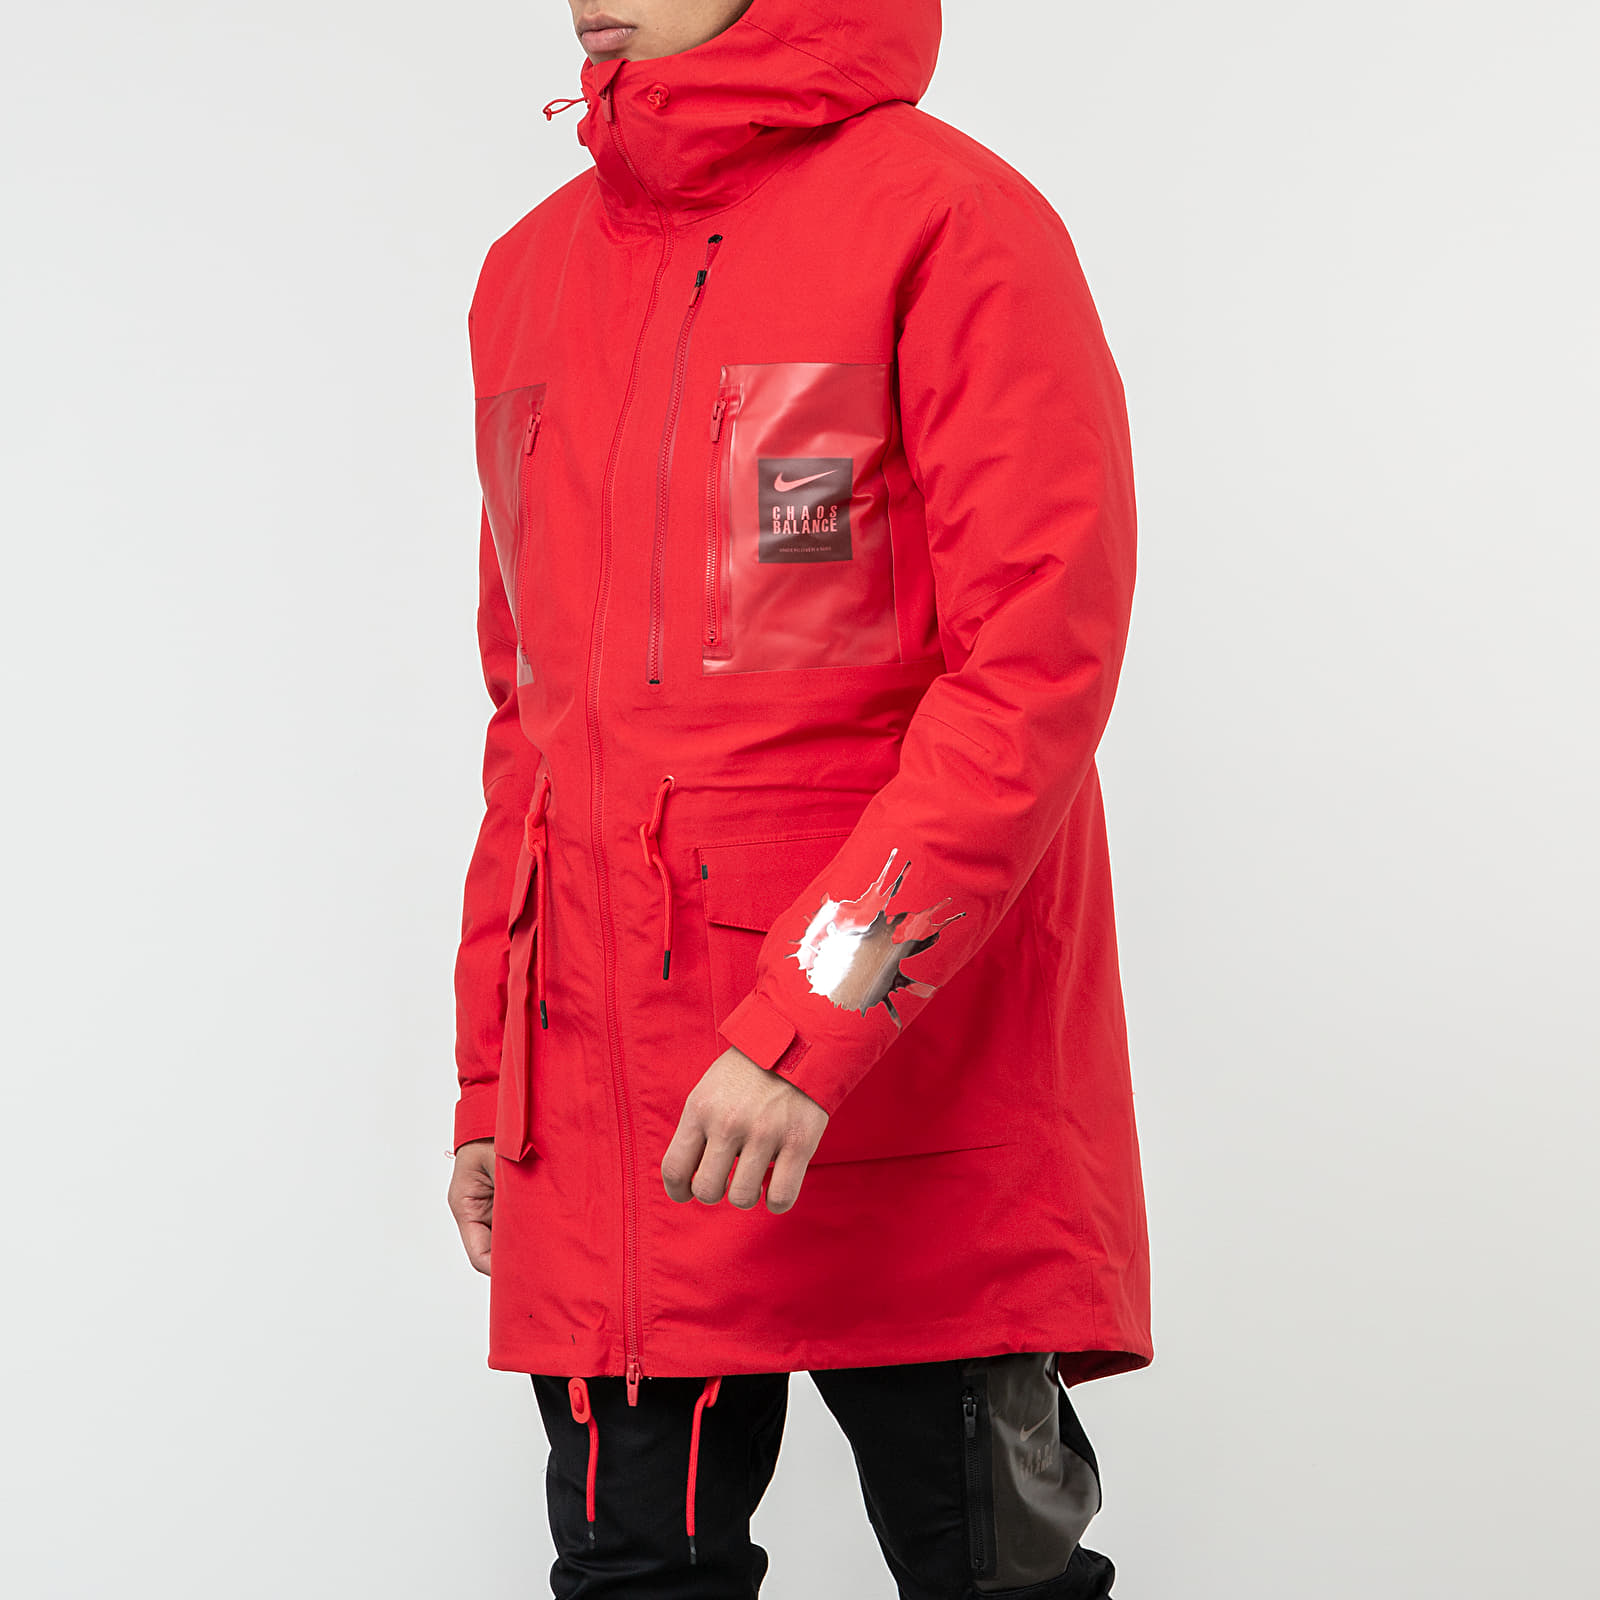 Jackets NikeLab x Undercover Chaos Balance Jacket Red